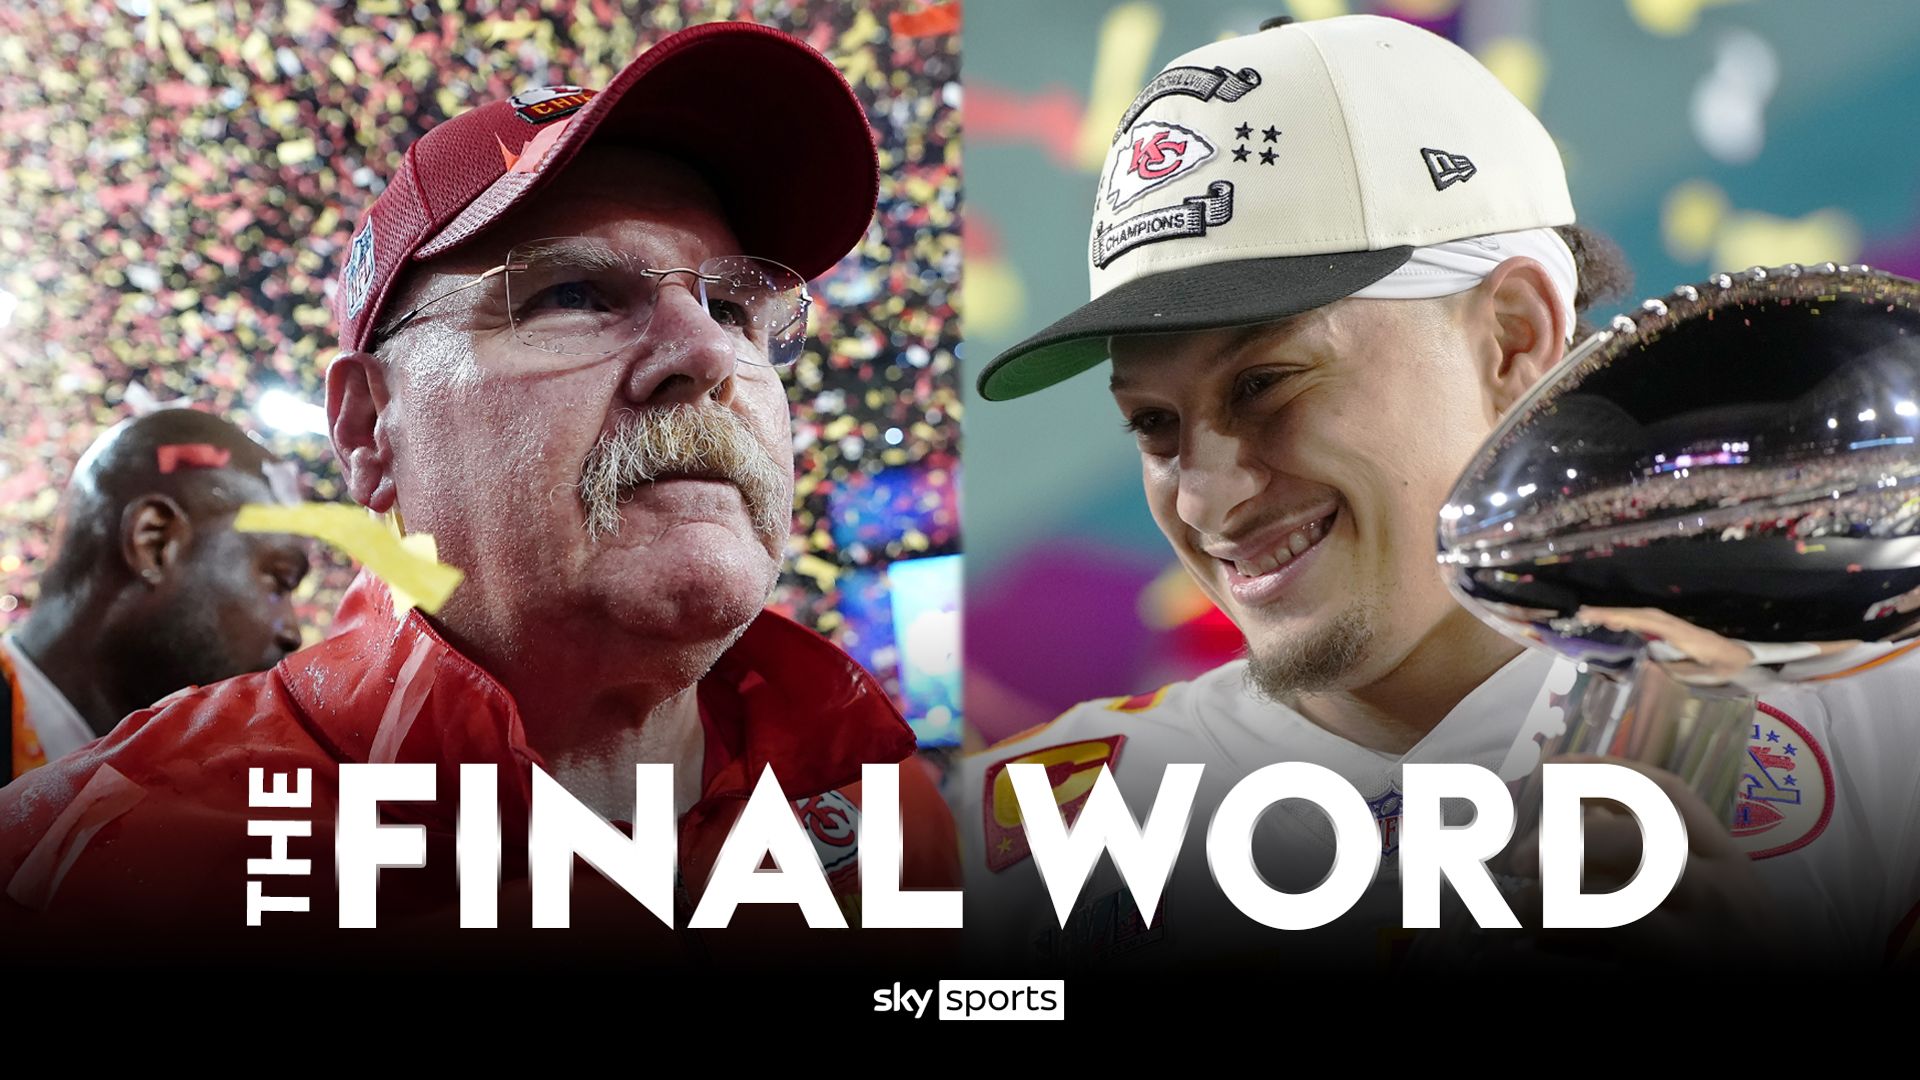 The Final Word: Mahomes legend lives on in epic Super Bowl win